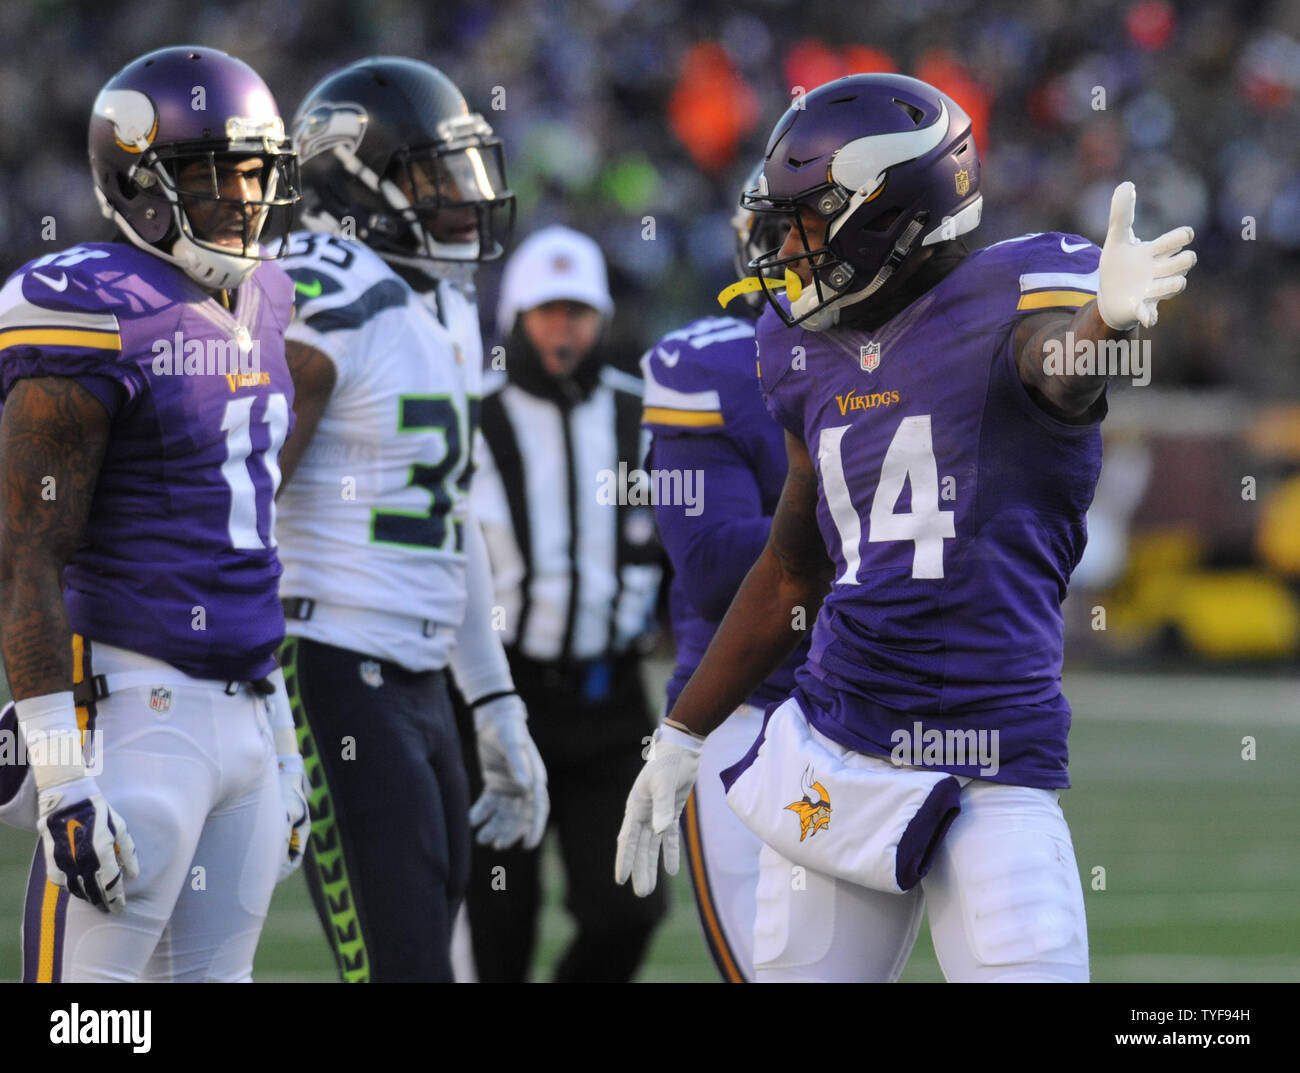 Minnesota Vikings wide receiver Stefon Diggs (14) indicates a first down  after his catch in the first quarter against the Seattle Seahawks in the  AFC Wild Card game at U.S. Bank Stadium